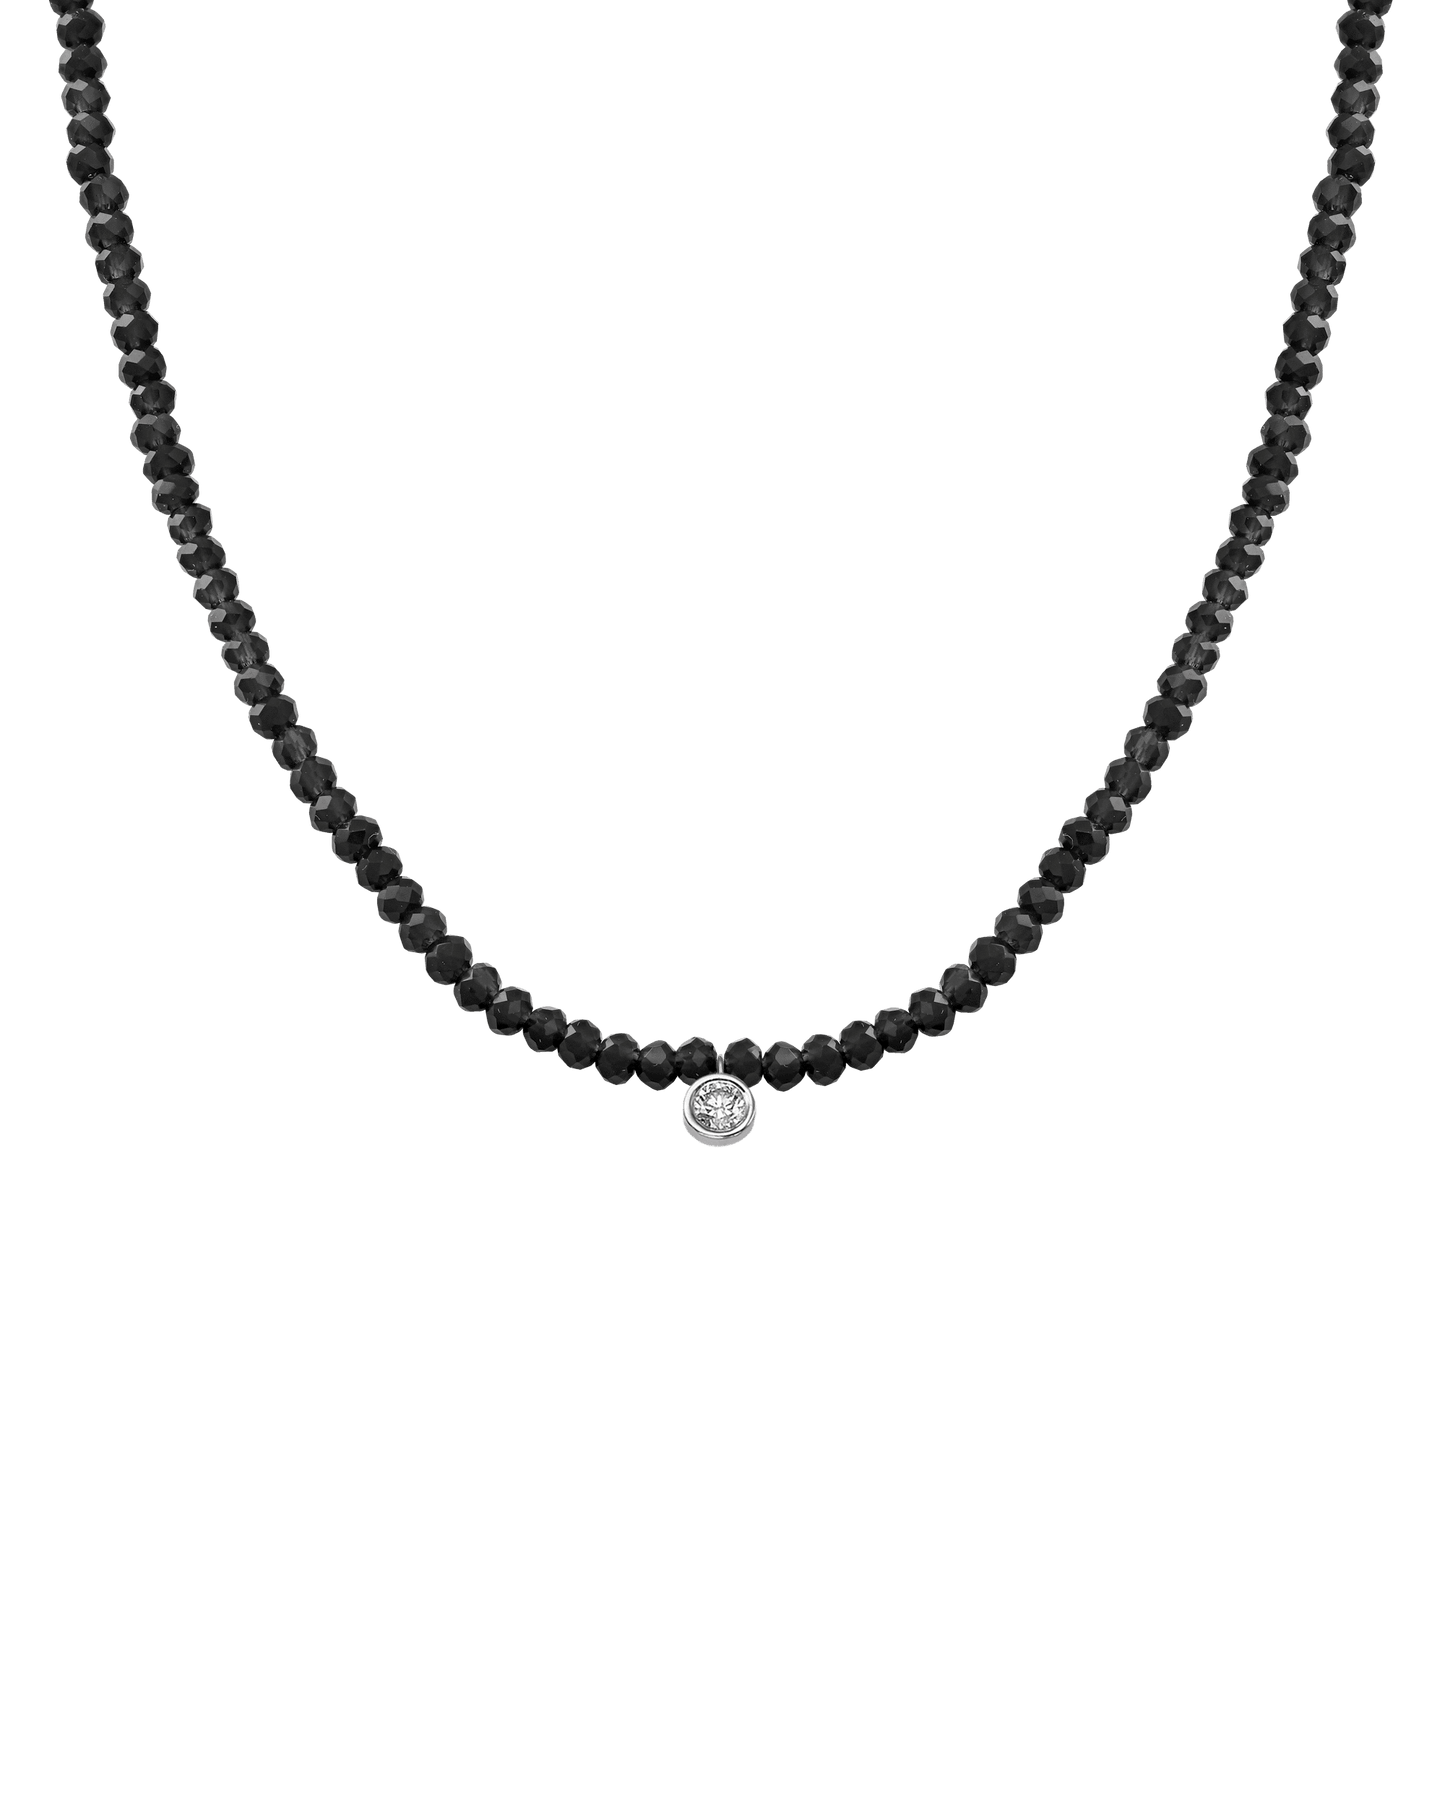 Apatite Gemstone & Diamond Necklace - 14K White Gold Necklaces 14K Solid Gold Glass Beads Black Spinnel Large: 0.10ct 14"